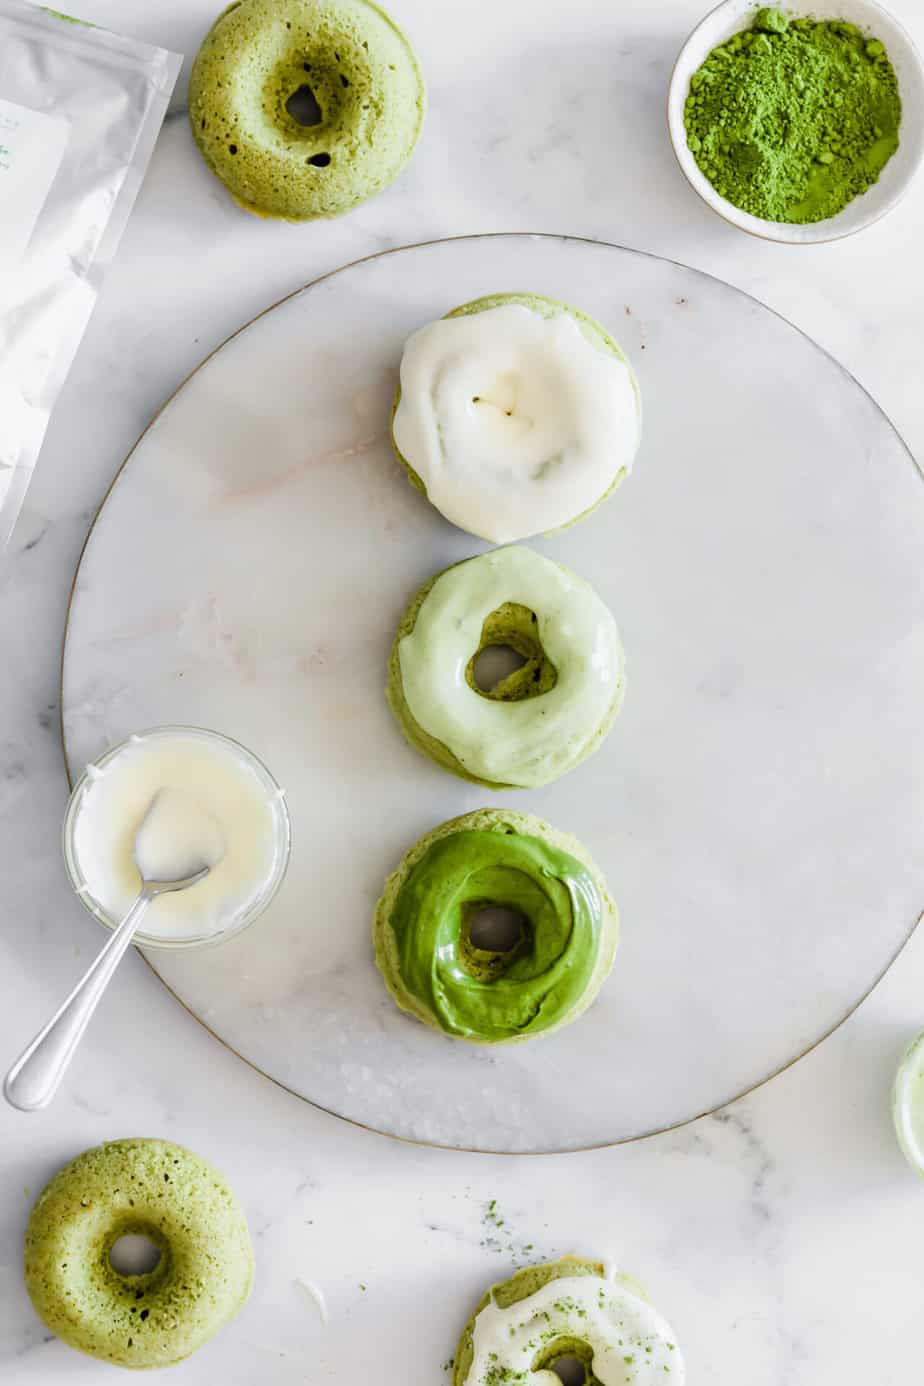 These easy Matcha Baked Donuts with Cream Cheese Glaze are perfectly soft, sweet, & simple to make. And let's not forget, they are also oh-so-pretty!